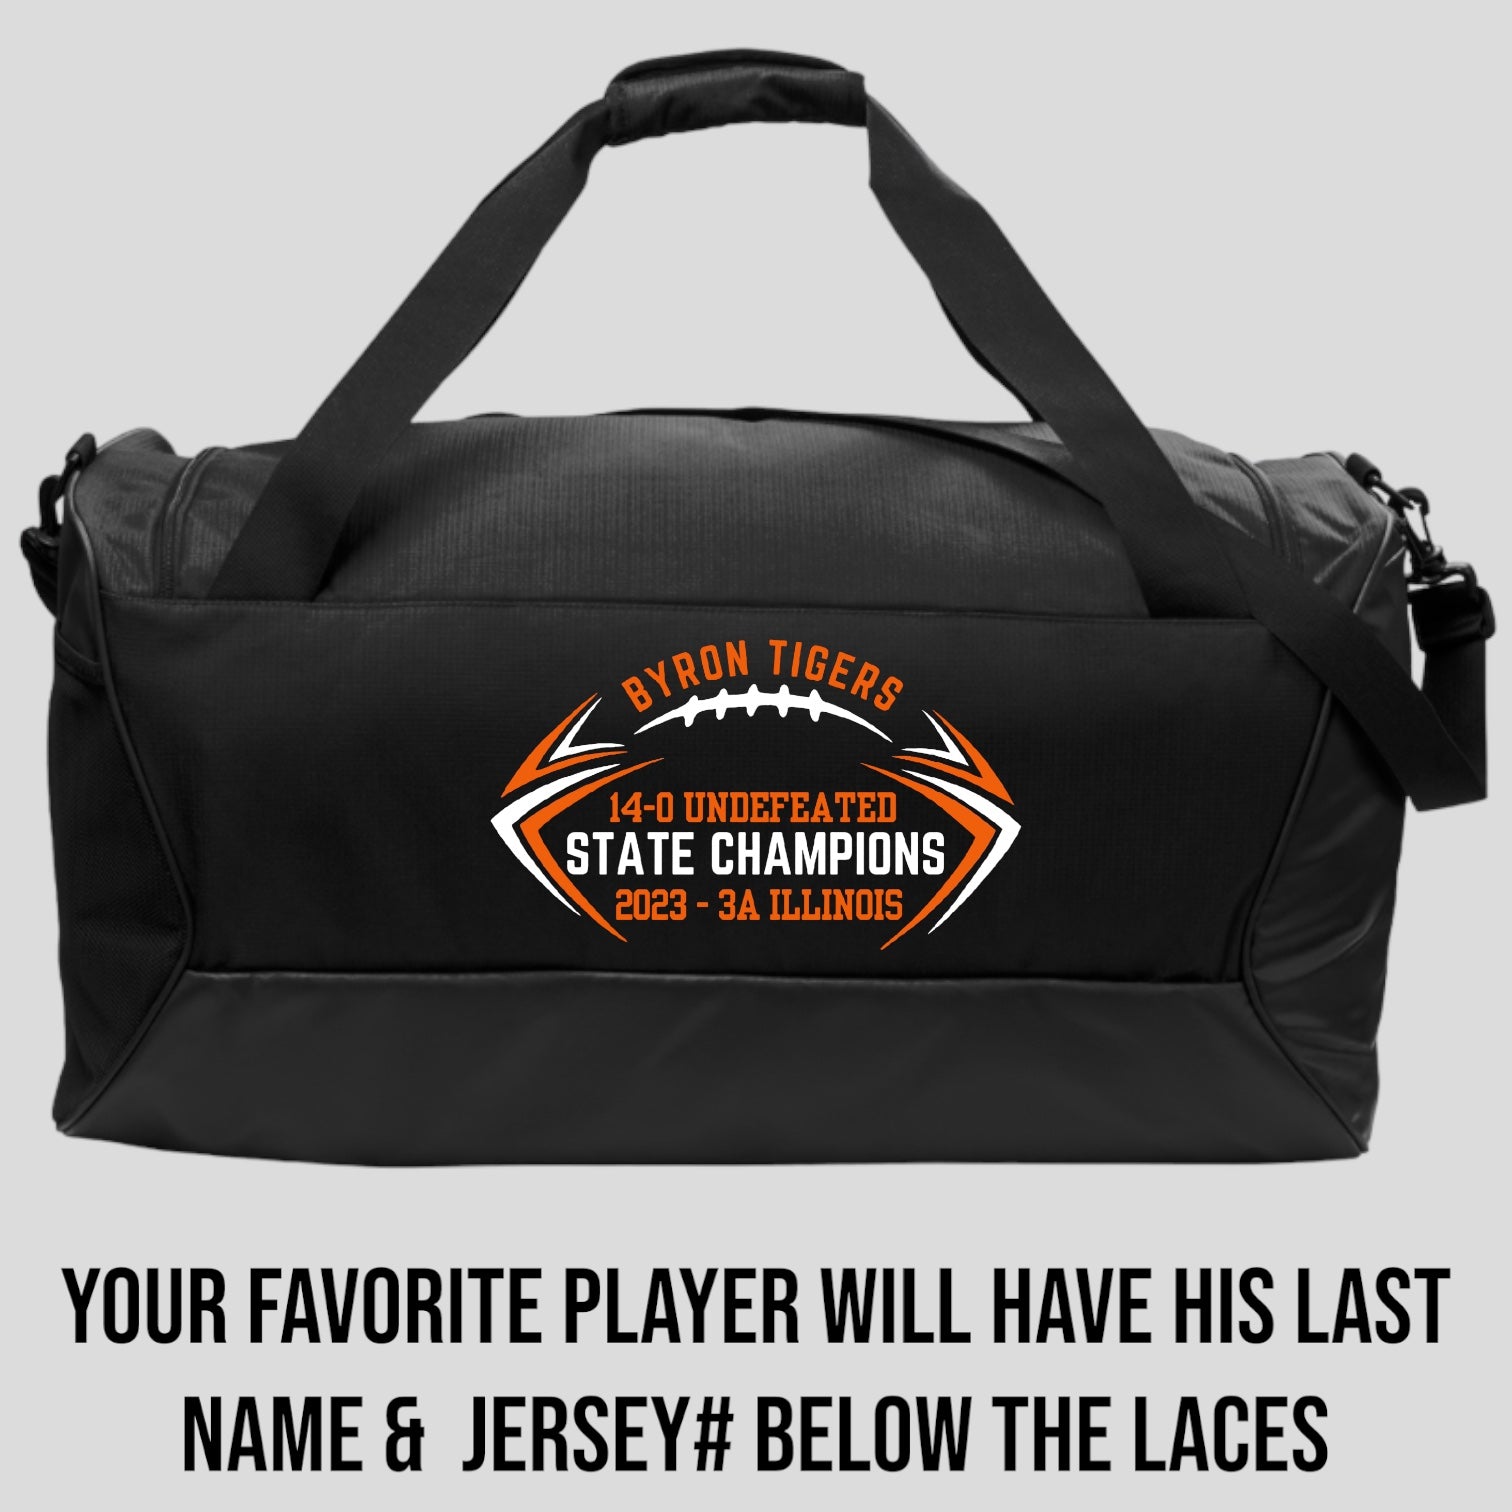 BYRON FOOTBALL CHAMPS - NIKE LARGE DUFFEL BAG WITH CUSTOM EMBROIDERY - DEADLINE IS SUNDAY, 1/14/2024